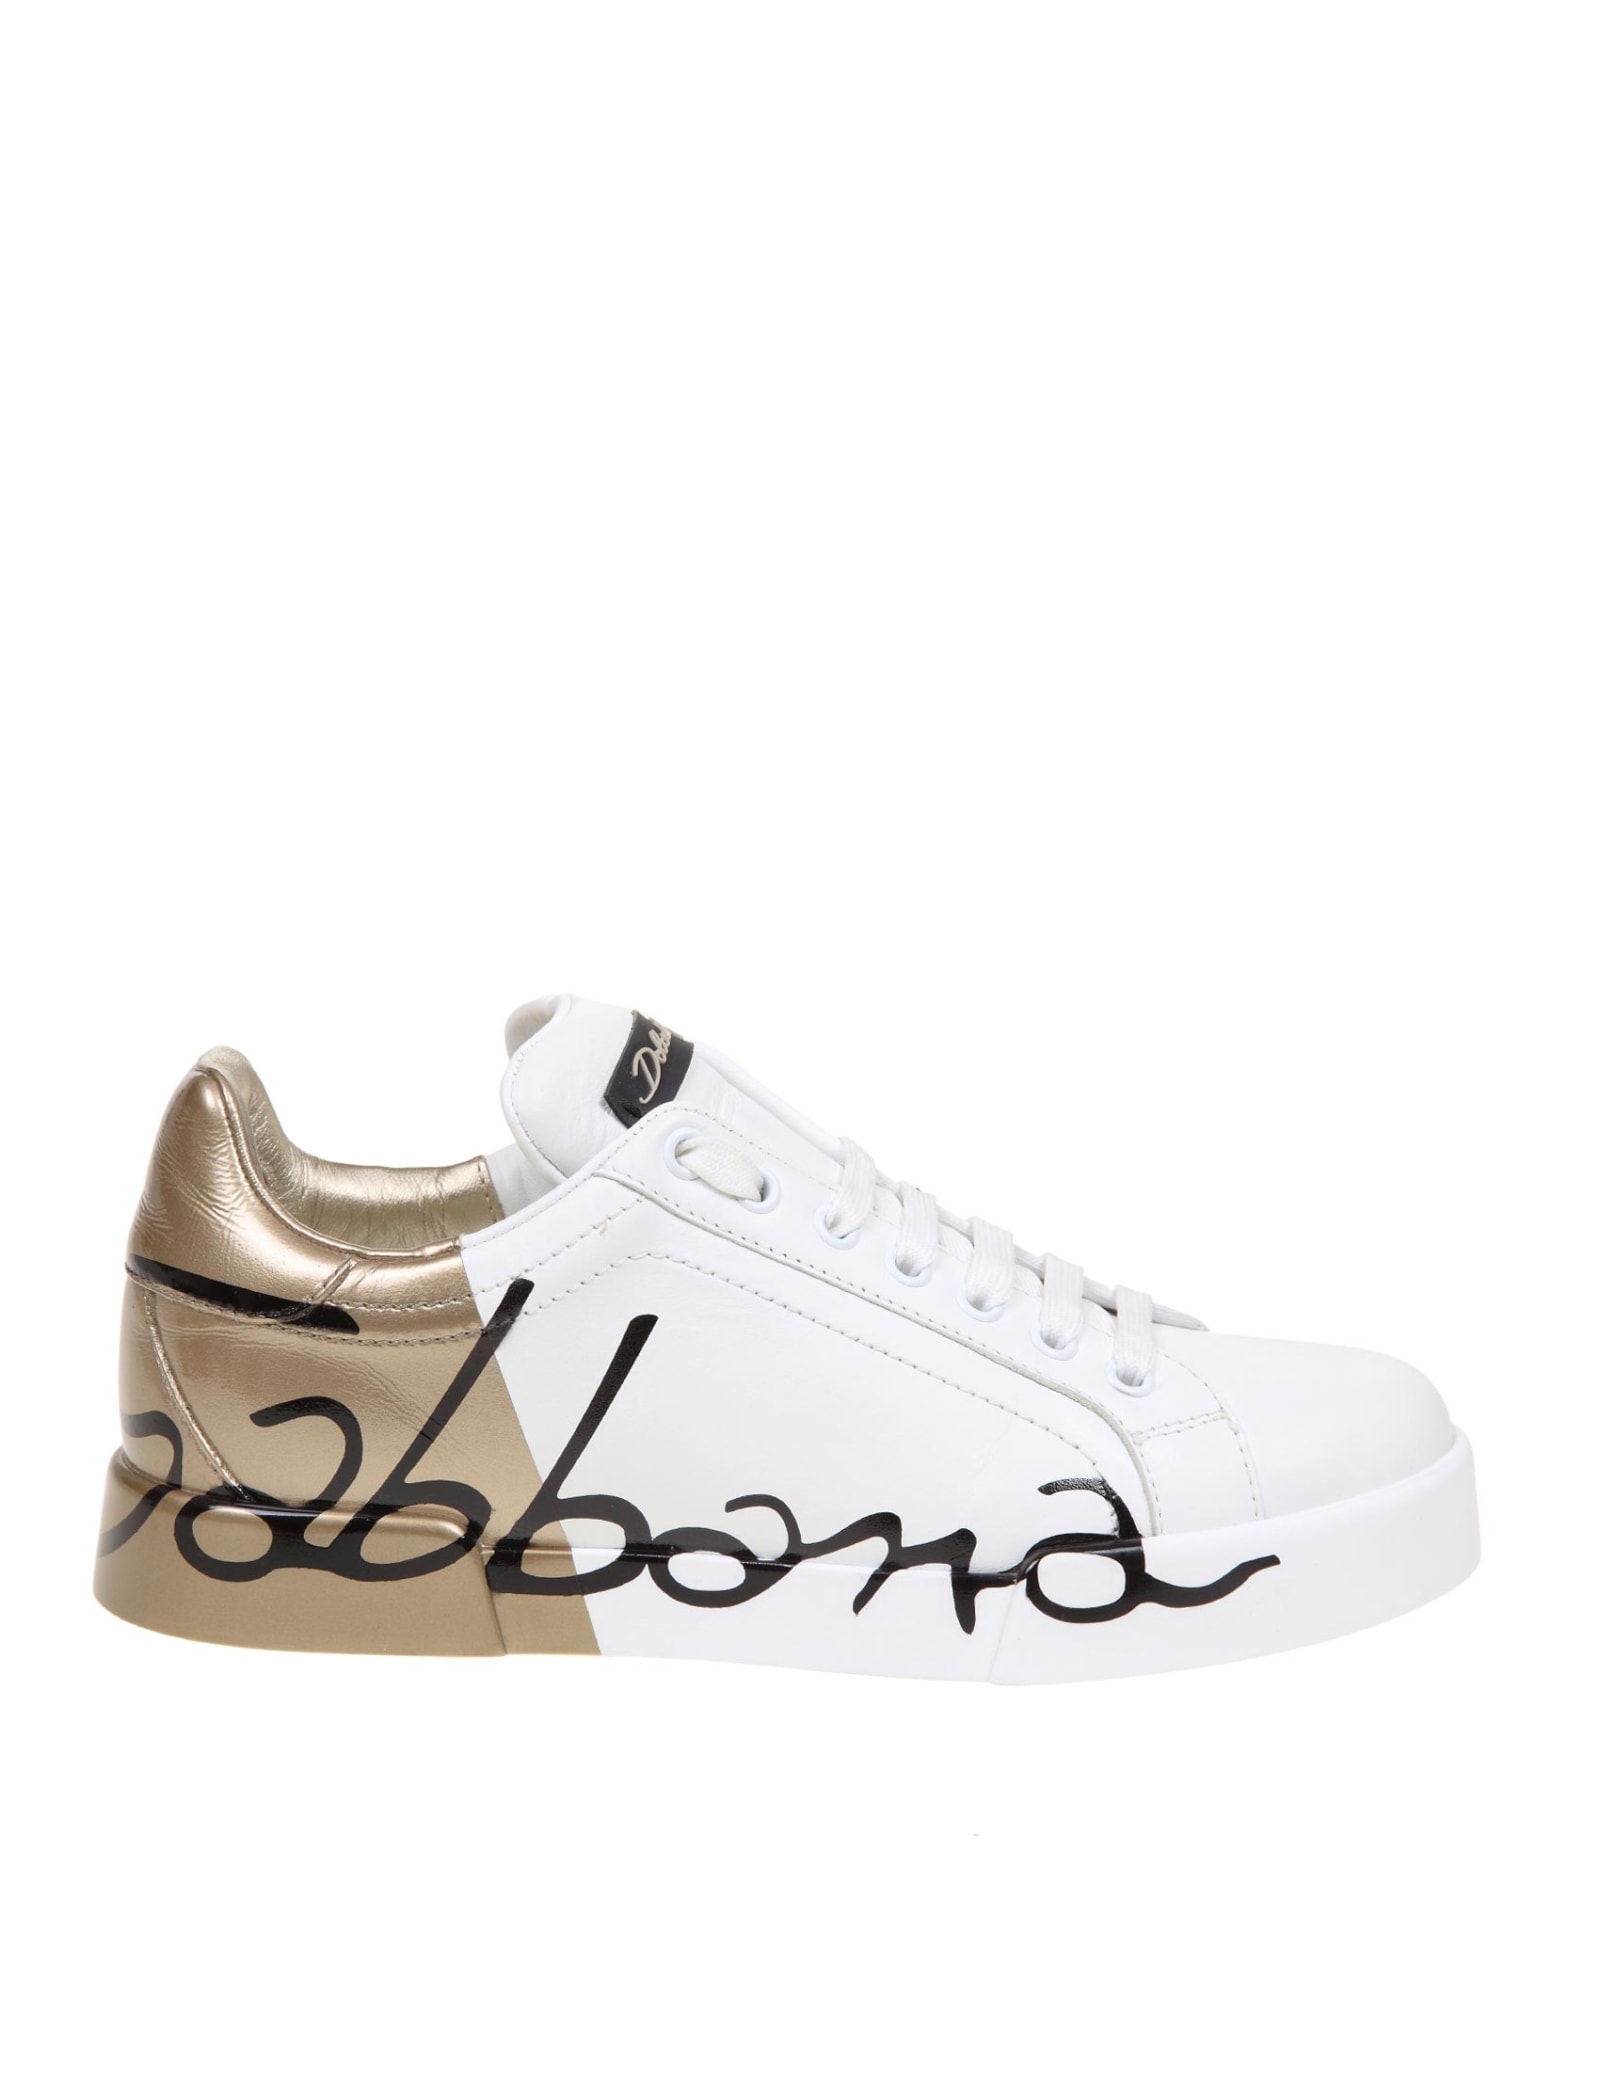 Buy Dolce & Gabbana Portofino Sneakers In White And Gold Leather online, shop Dolce & Gabbana shoes with free shipping